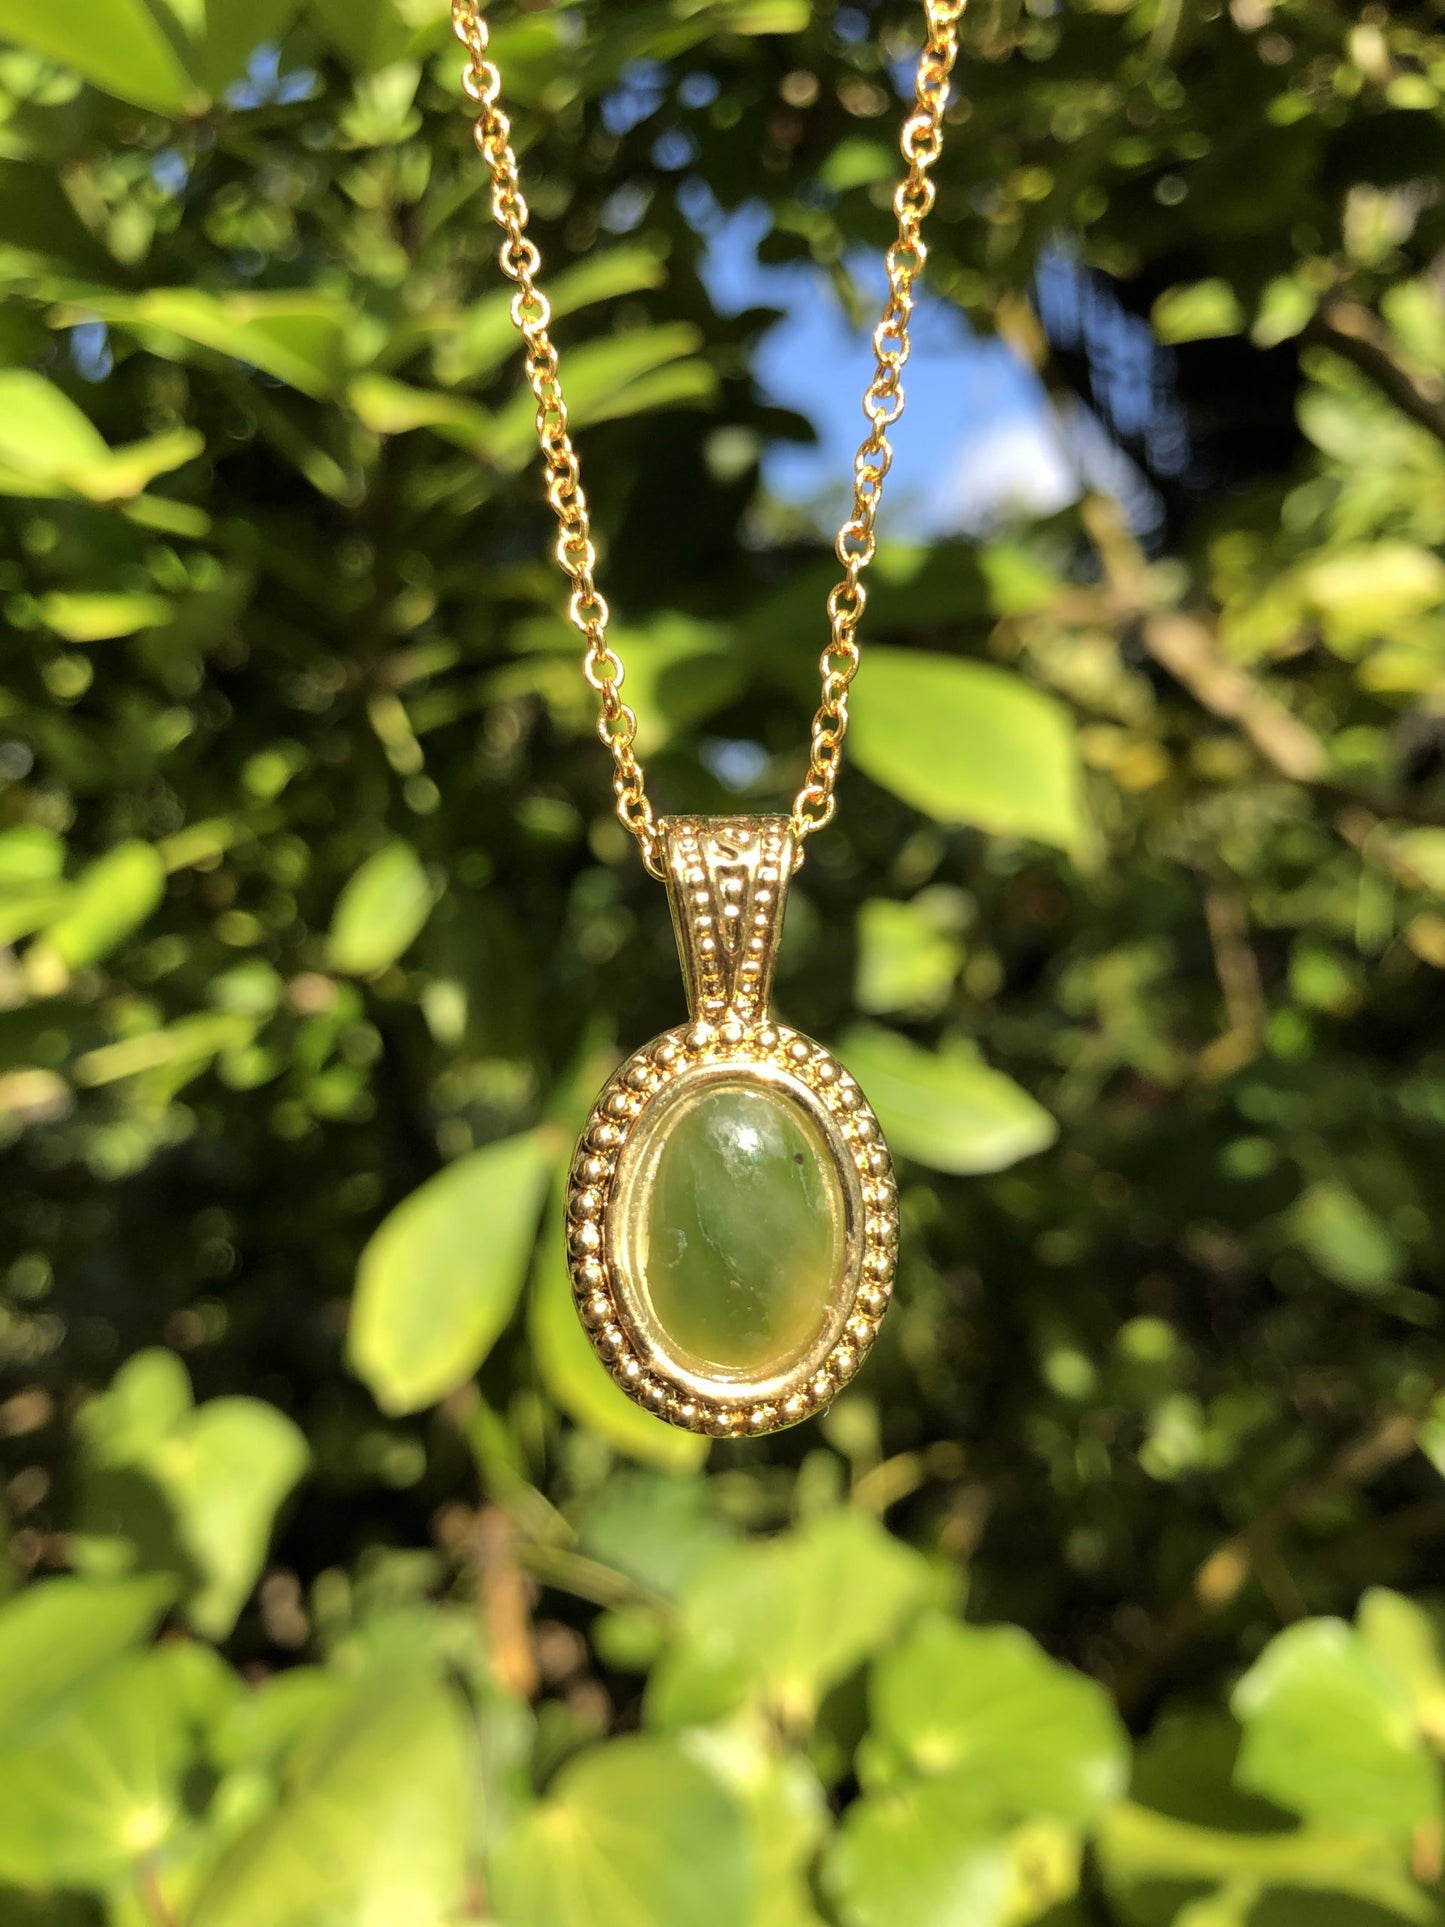 Necklace with New Zealand Pounamu (Greenstone, nephrite jade), bright green Kahurangi jade, hand polished to an 14x10mm cabochon and mounted in a gold plated setting with 19 inch chain.